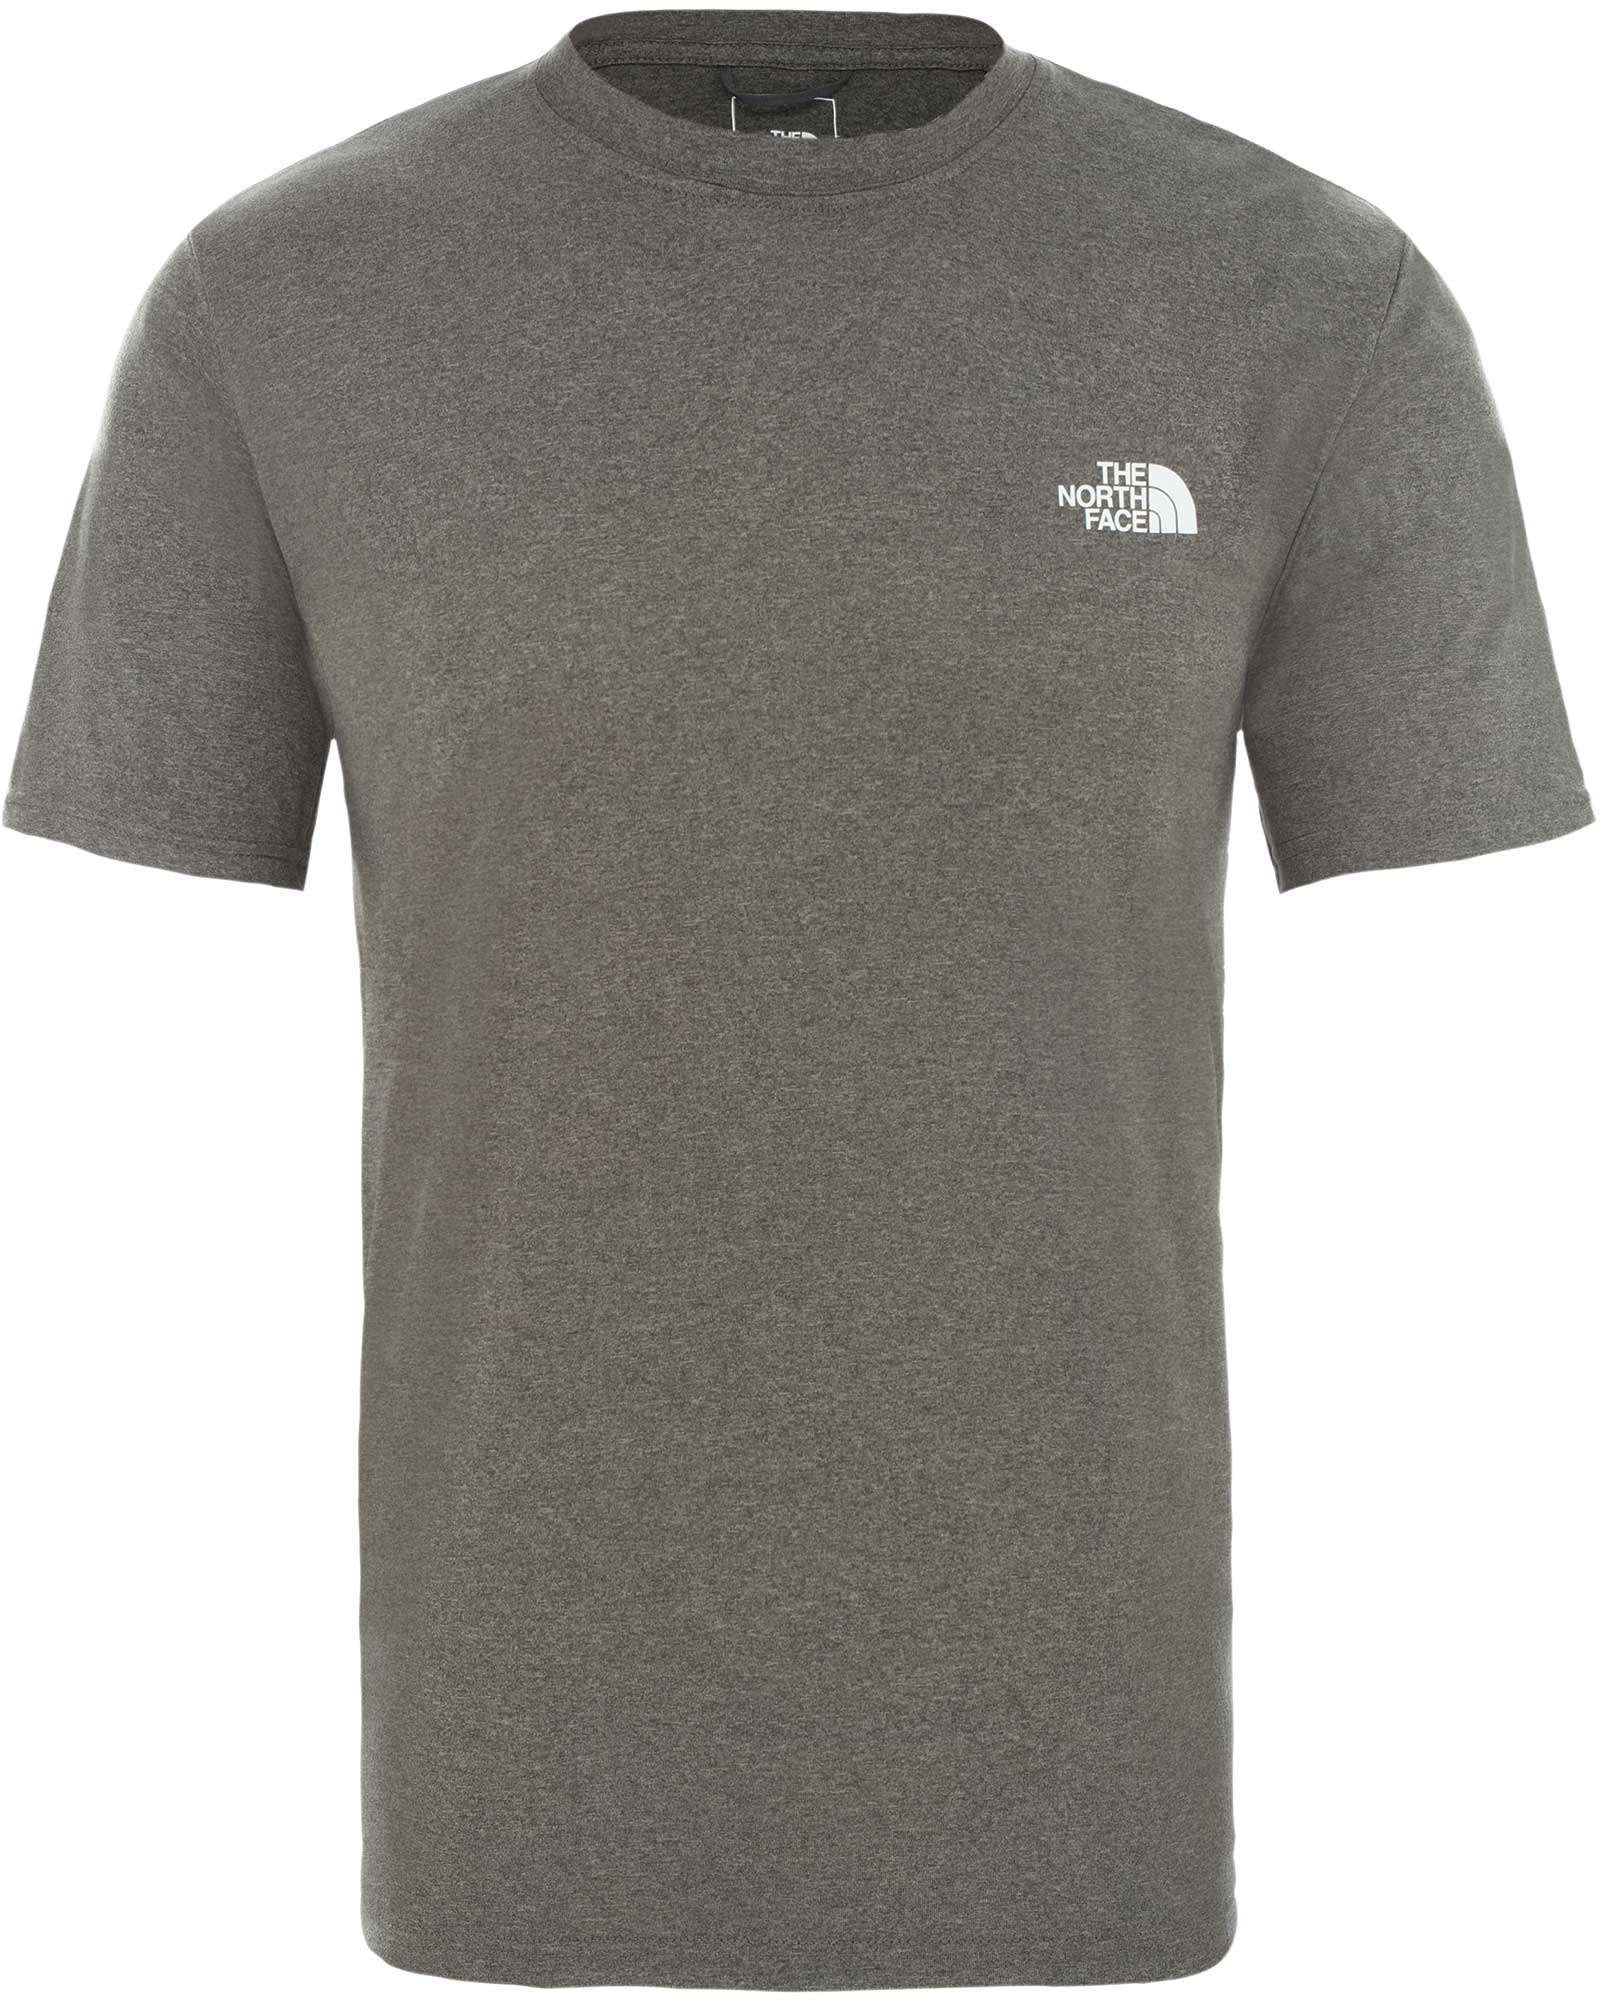 The North Face Reaxion Amp Men’s Crew T Shirt - New Taupe Green Heather L